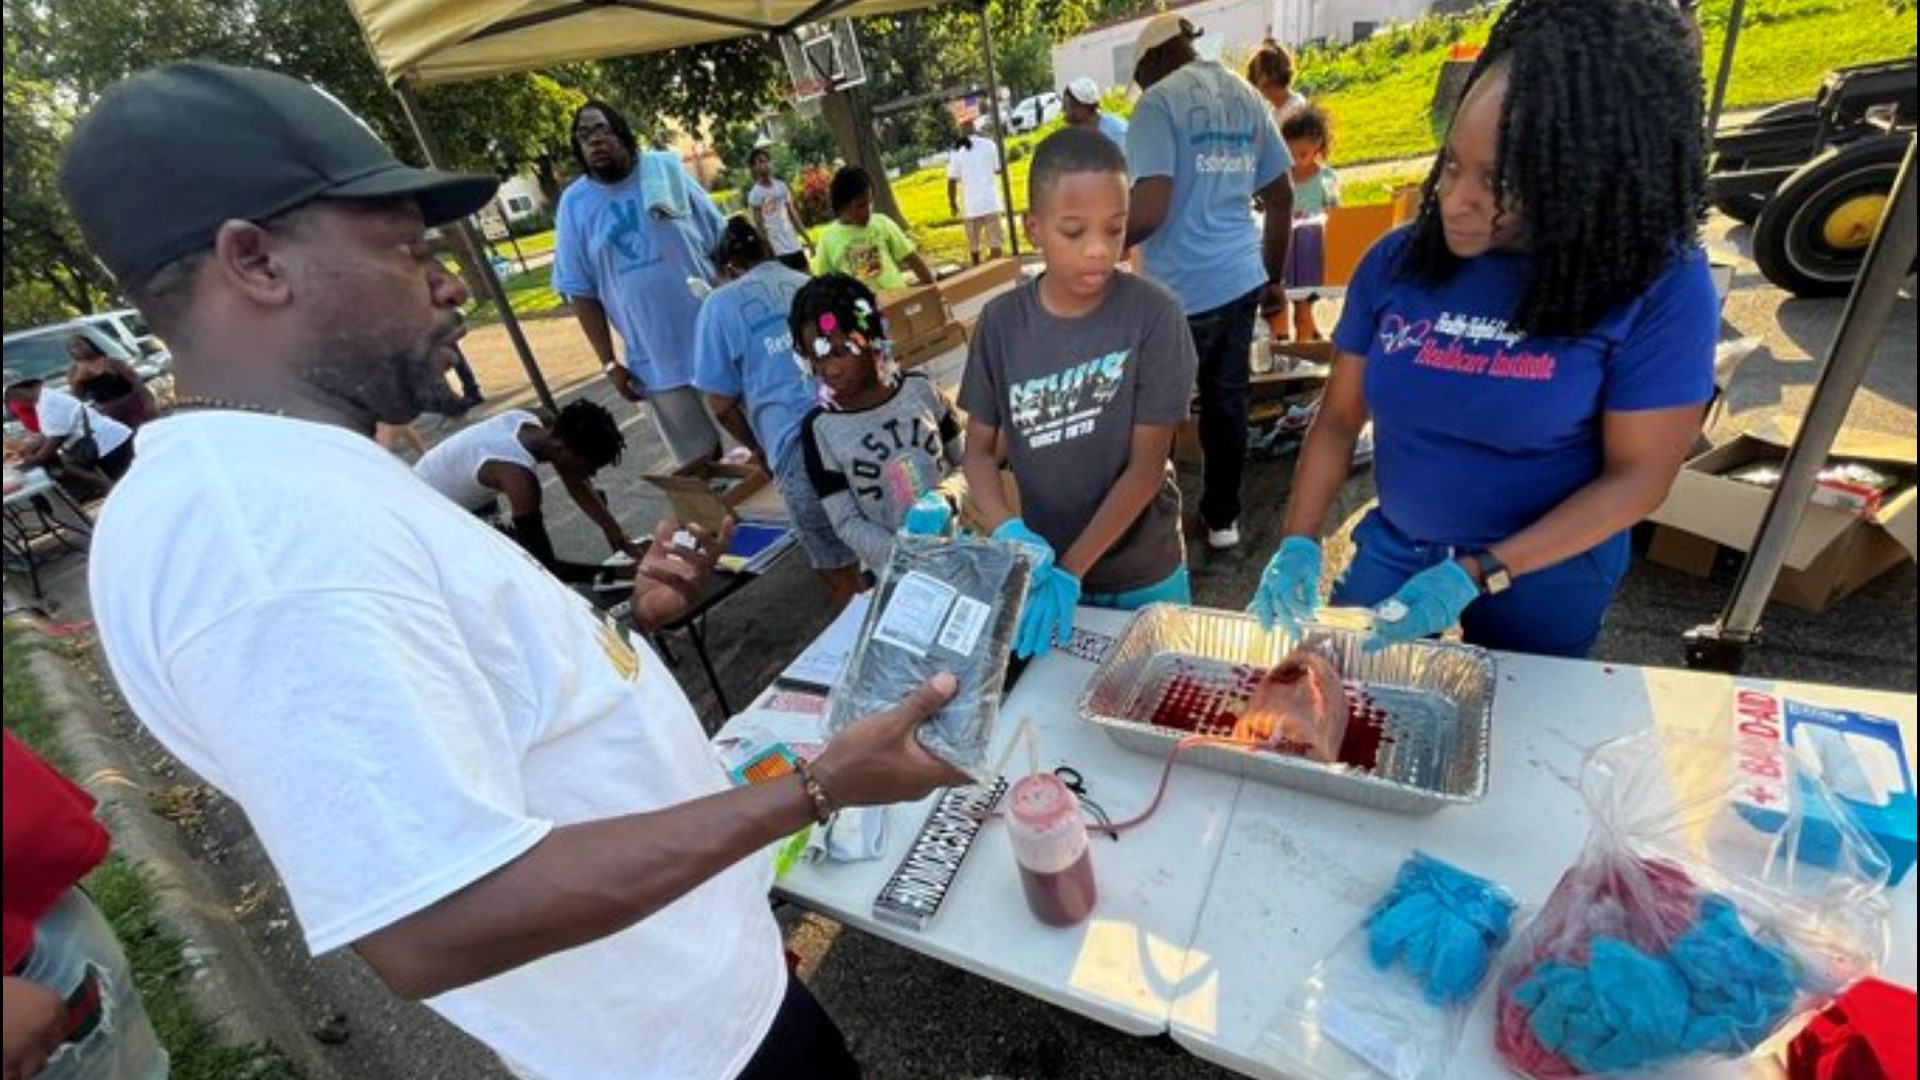 In addition to popular block party events like cooking out, bounce houses and school supply giveaways, there were also free medical supplies and training.